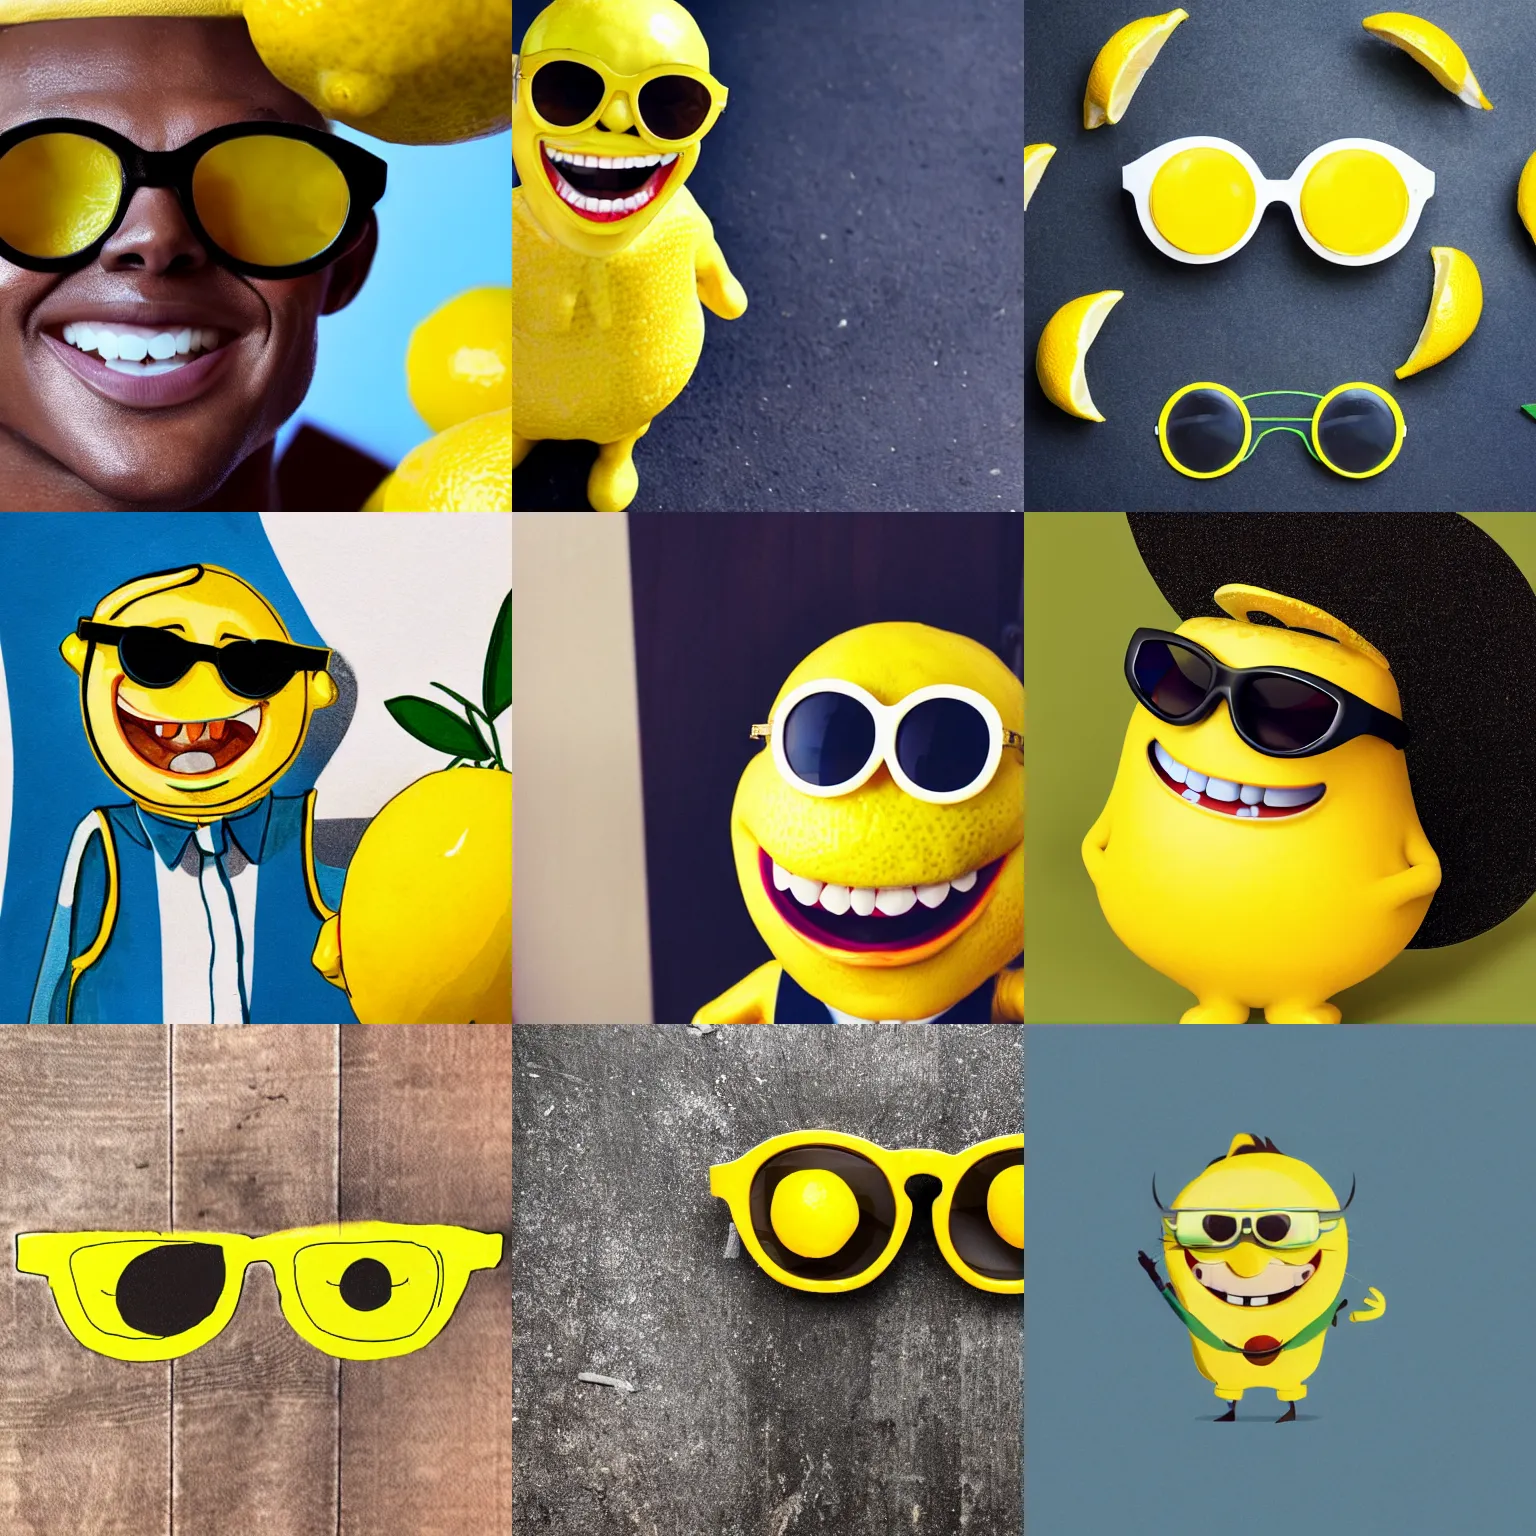 Prompt: A lemon character wearing sunglasses and smiling with perfect bright white teeth